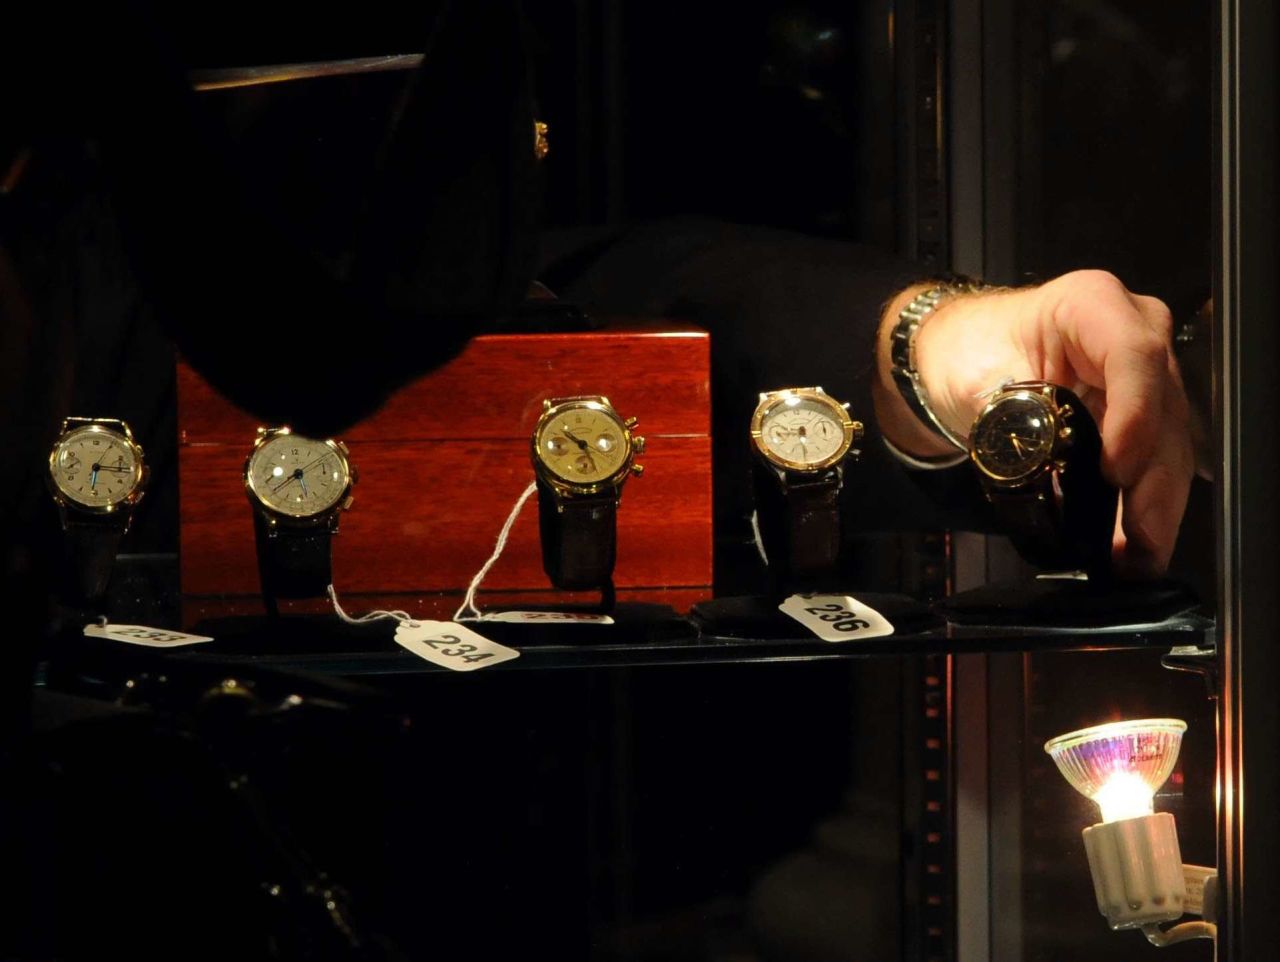 Watches that belonged to Bernie Madoff are seen before an auction in New York in November 2009. Some of Madoff's property has been auctioned off over the years, compensating the victims of his $20 billion Ponzi scheme -- the largest financial fraud in history.